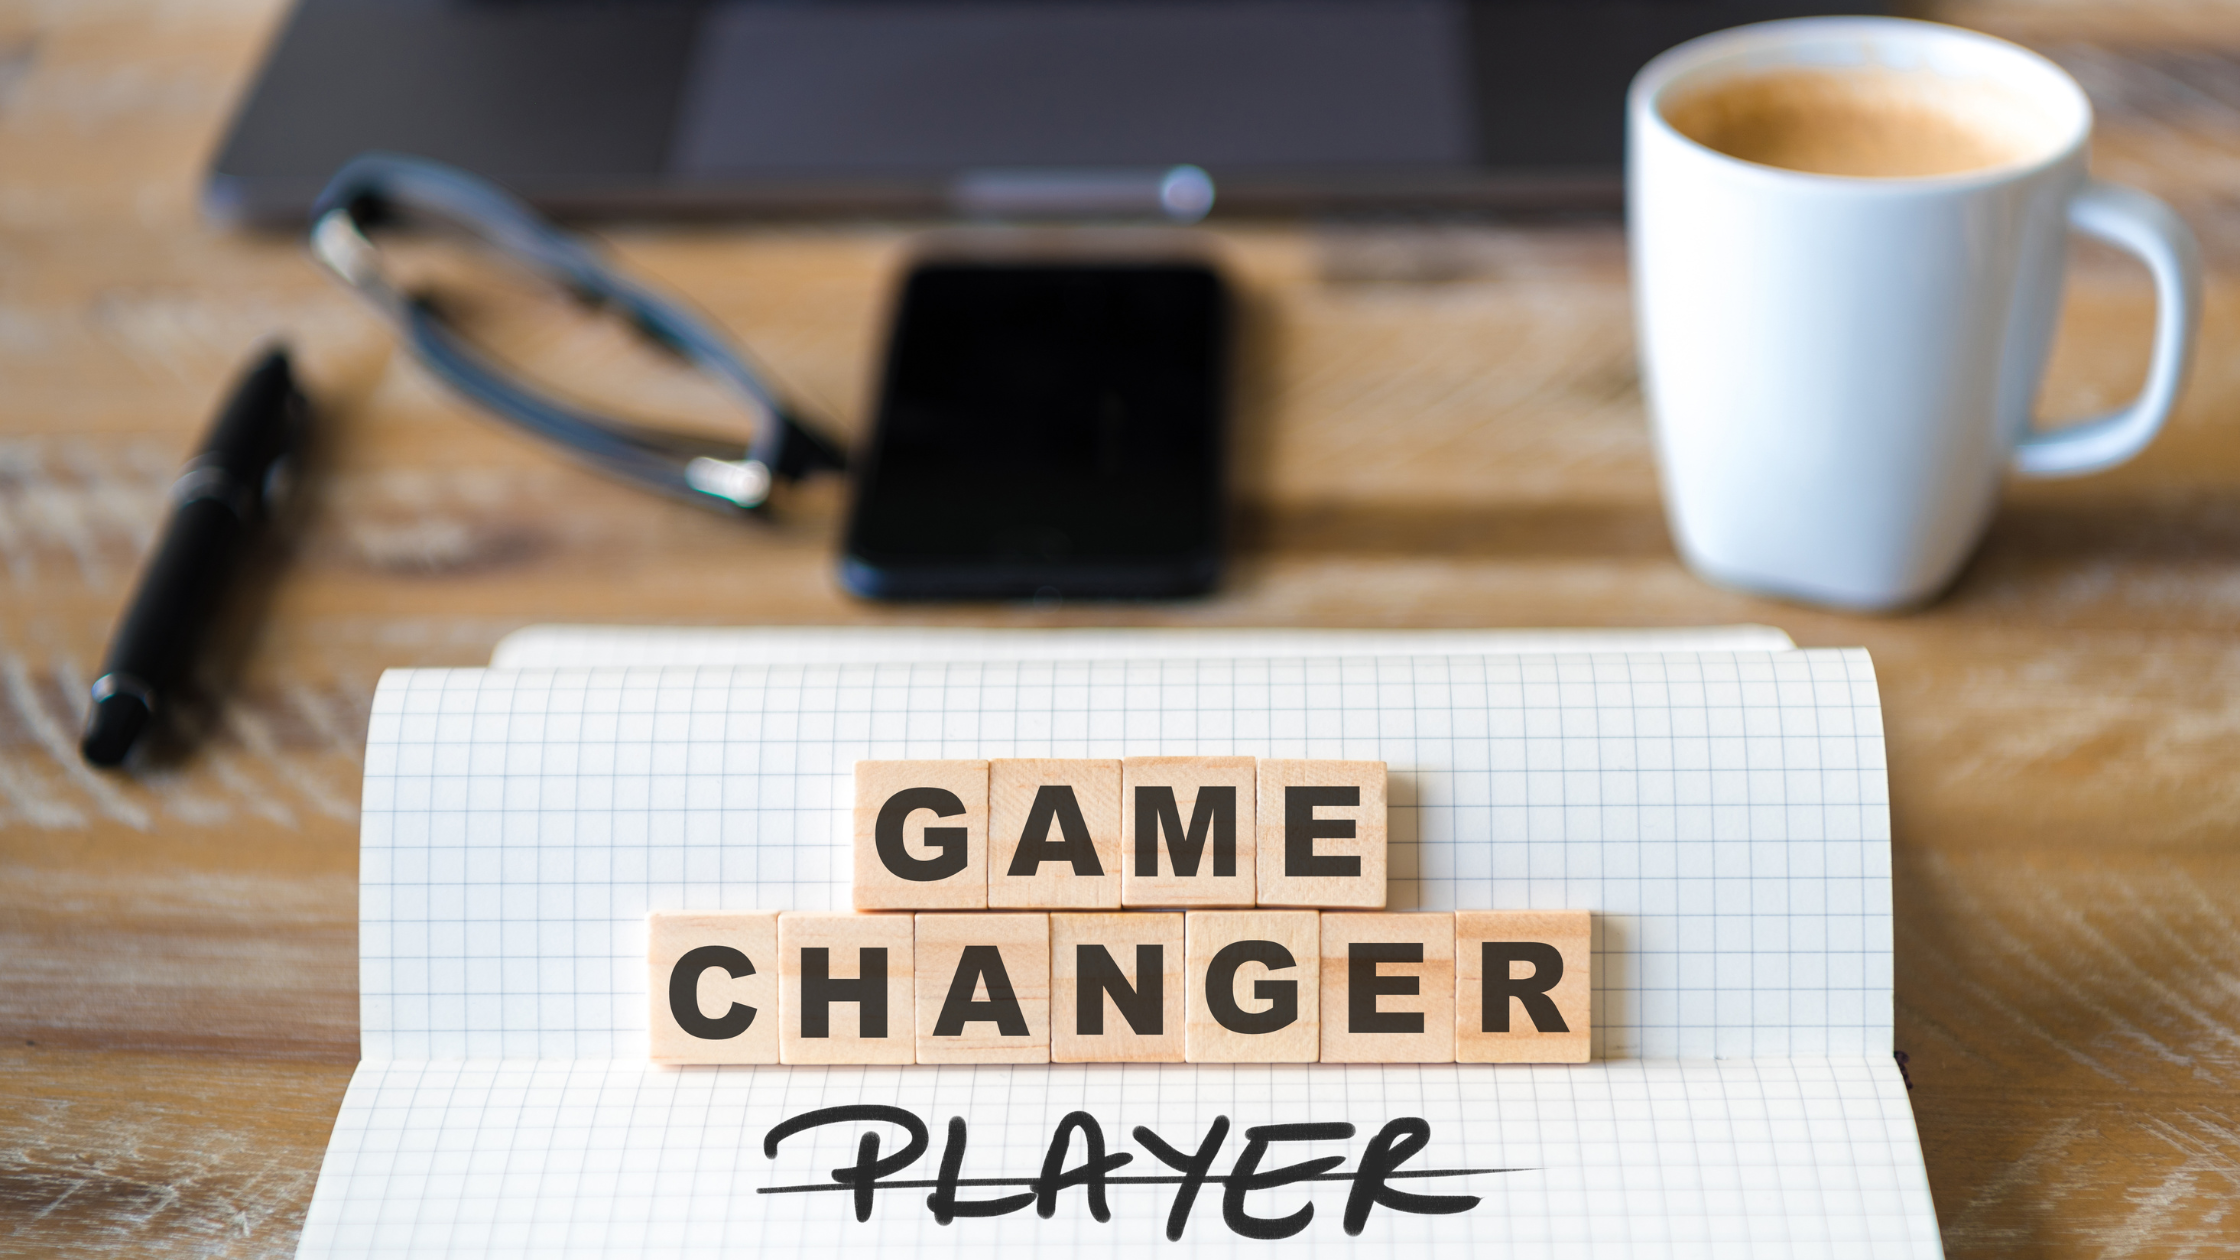 Why Do My Coworkers Use The Phrase "Game Changer"In The Workplace?